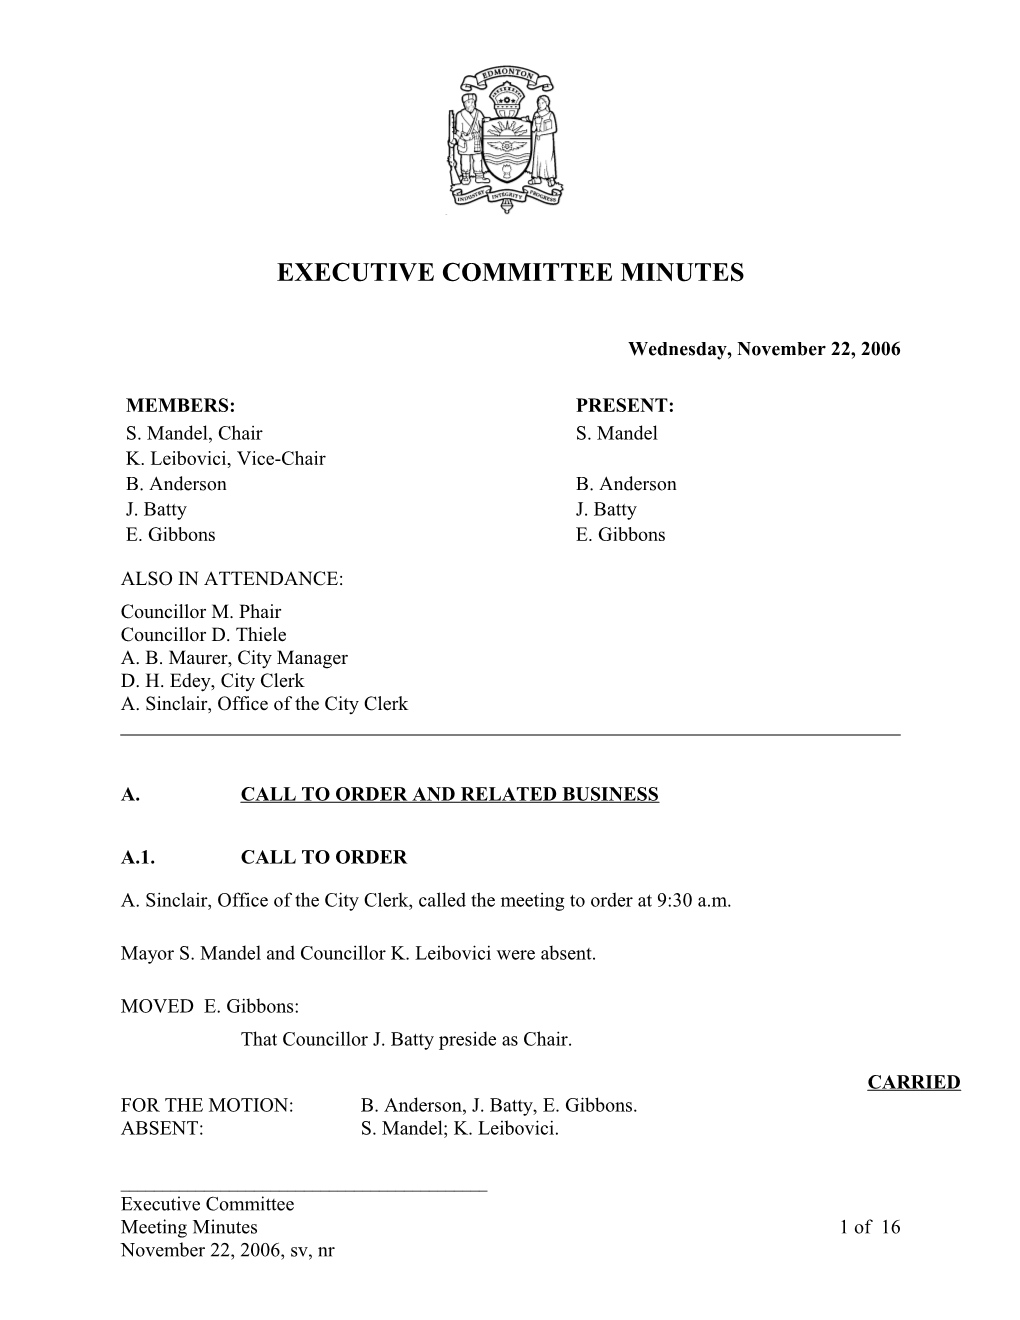 Minutes for Executive Committee November 22, 2006 Meeting